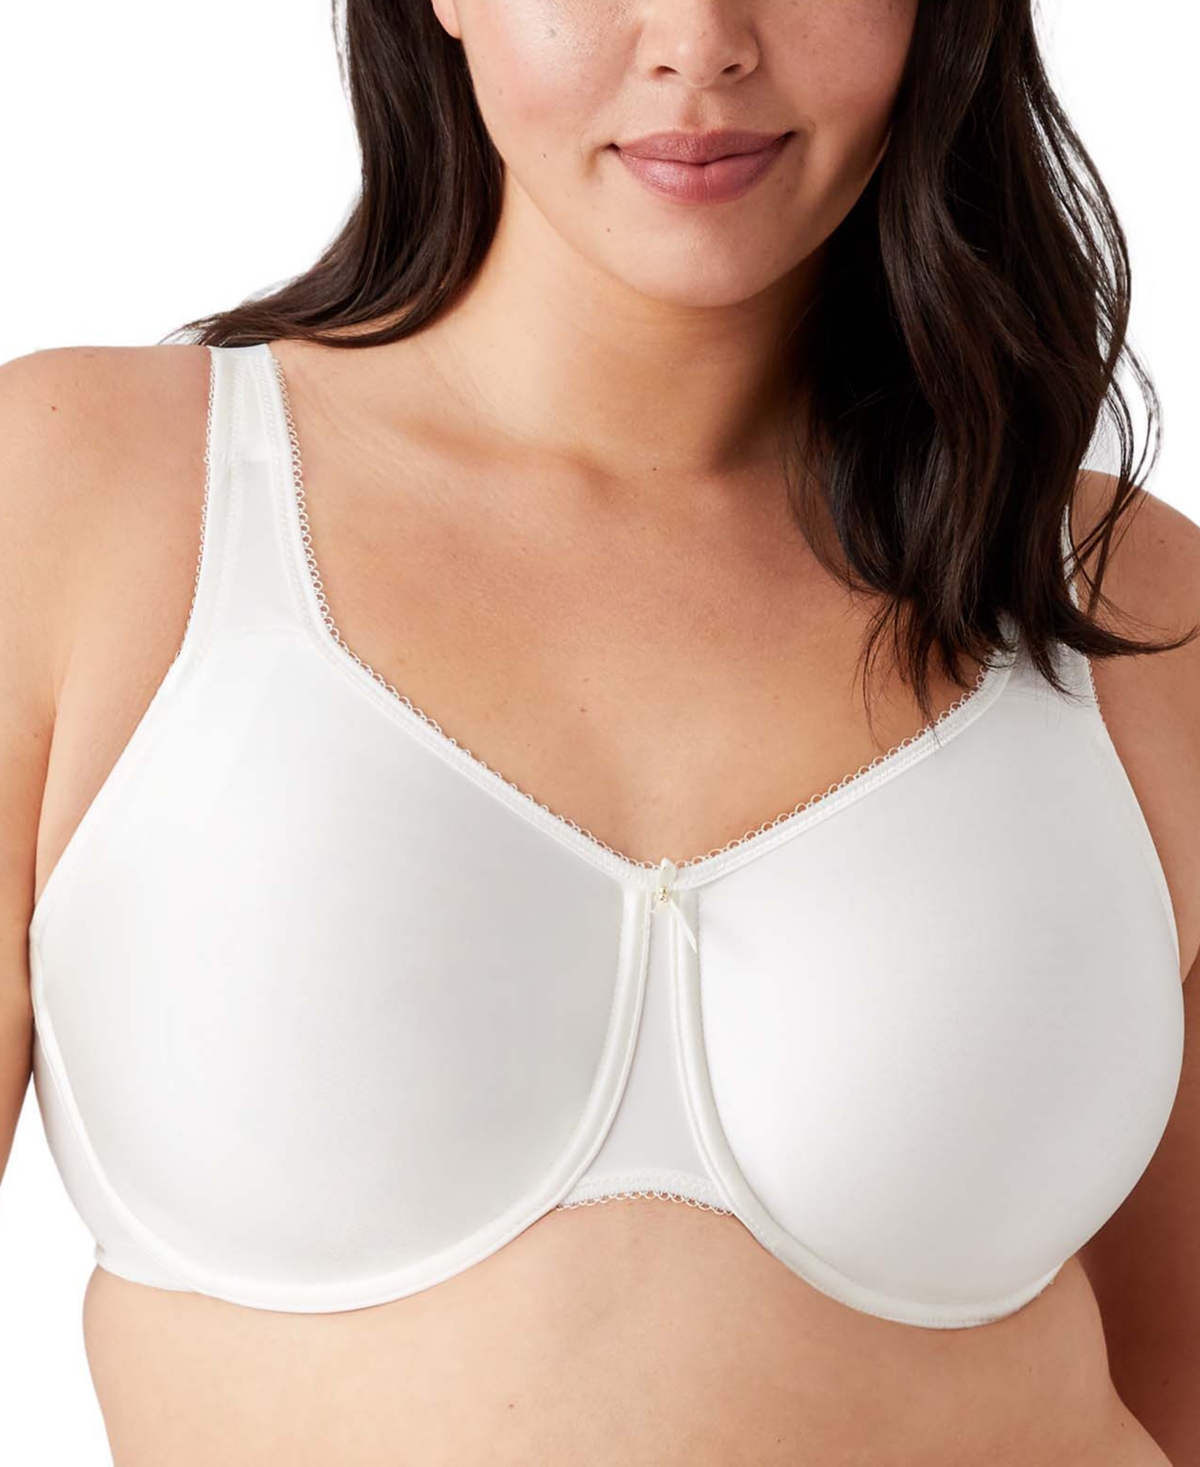 Basic Beauty Full-Figure Underwire Bra 855192, Up To H Cup - Ivory (Nude )